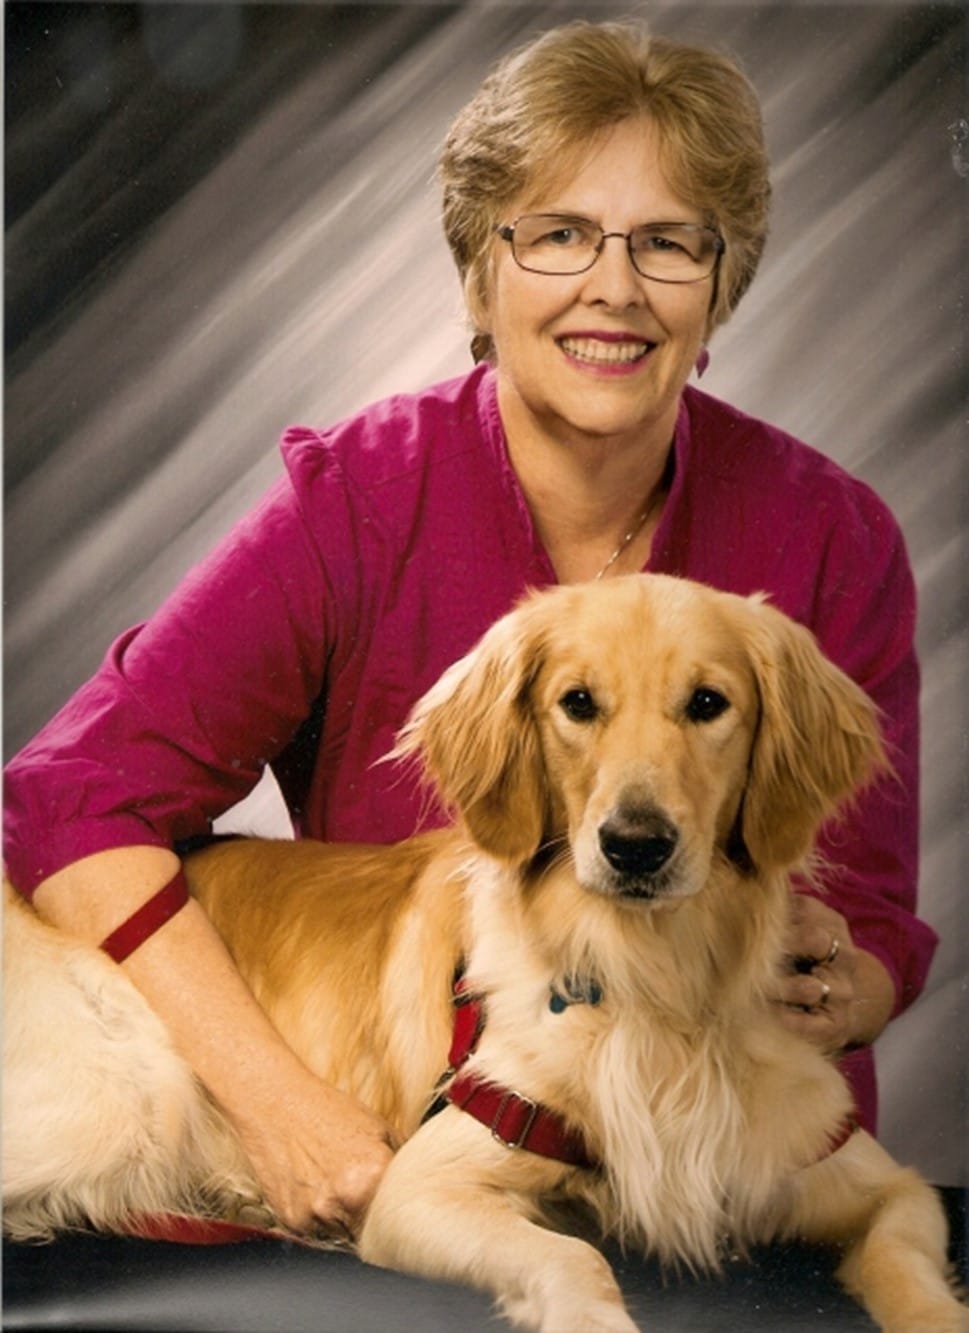 A smiling woman poses with her hands on a golden retriever.